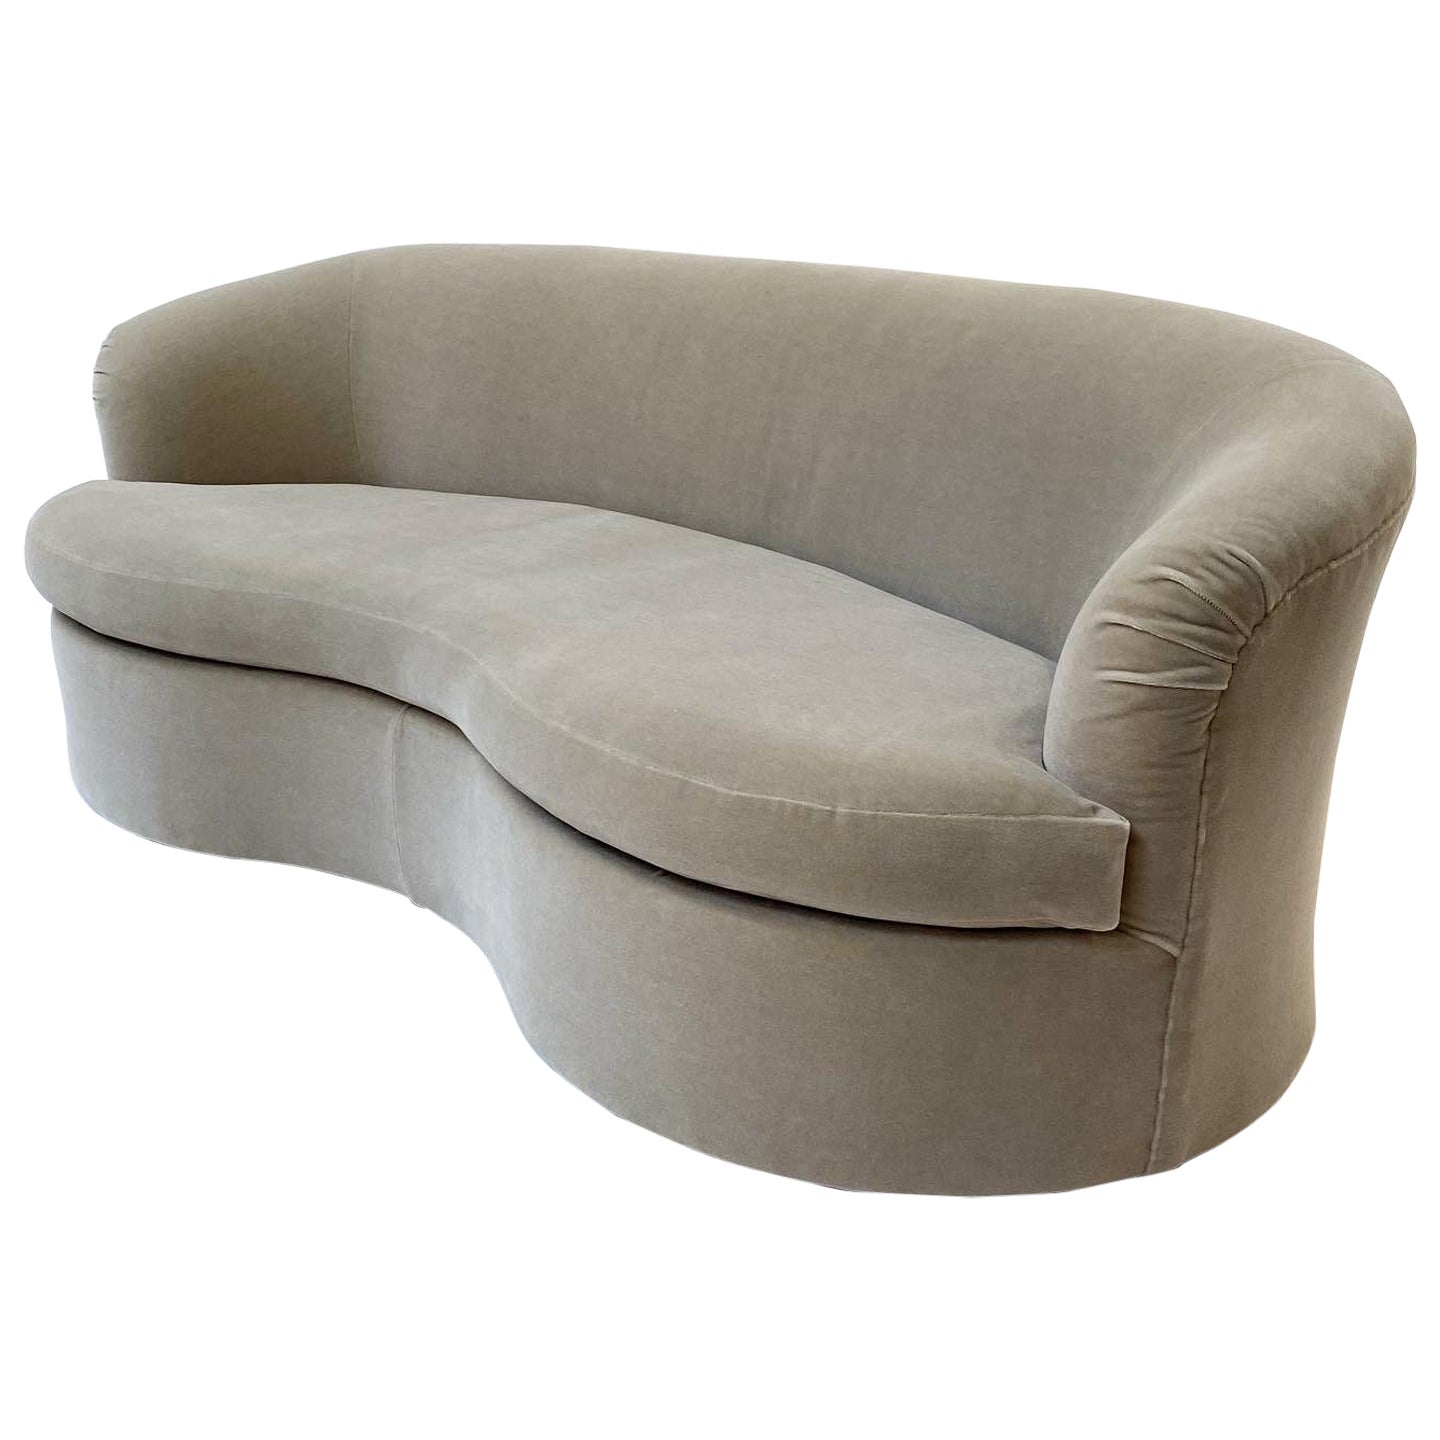 Vintage Curved Sofa in Neutral Mohair